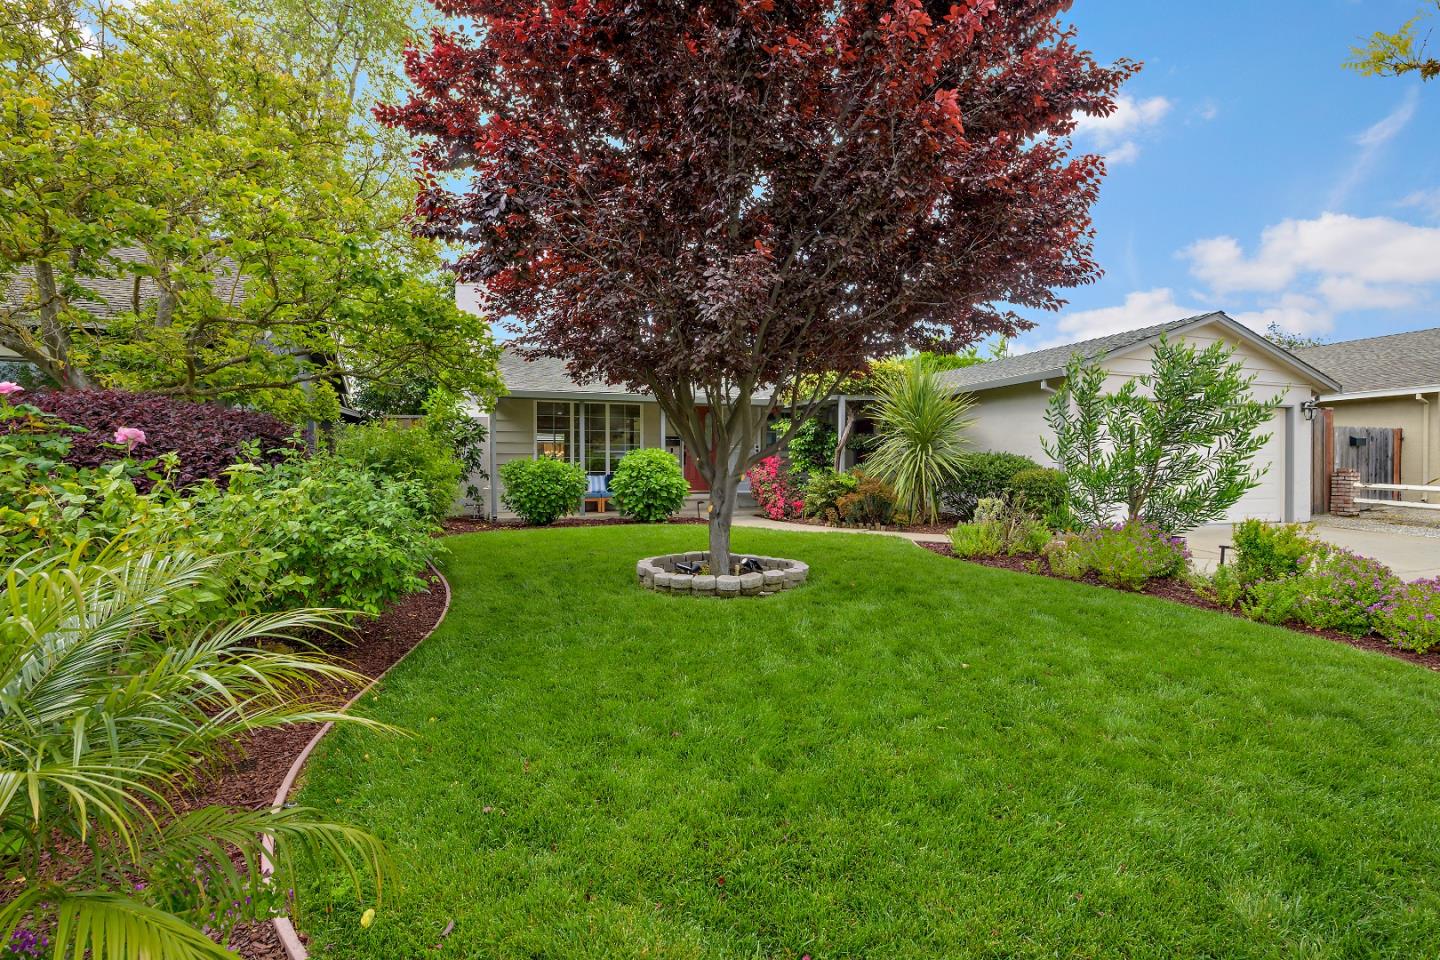 a view of a backyard with plants and large trees